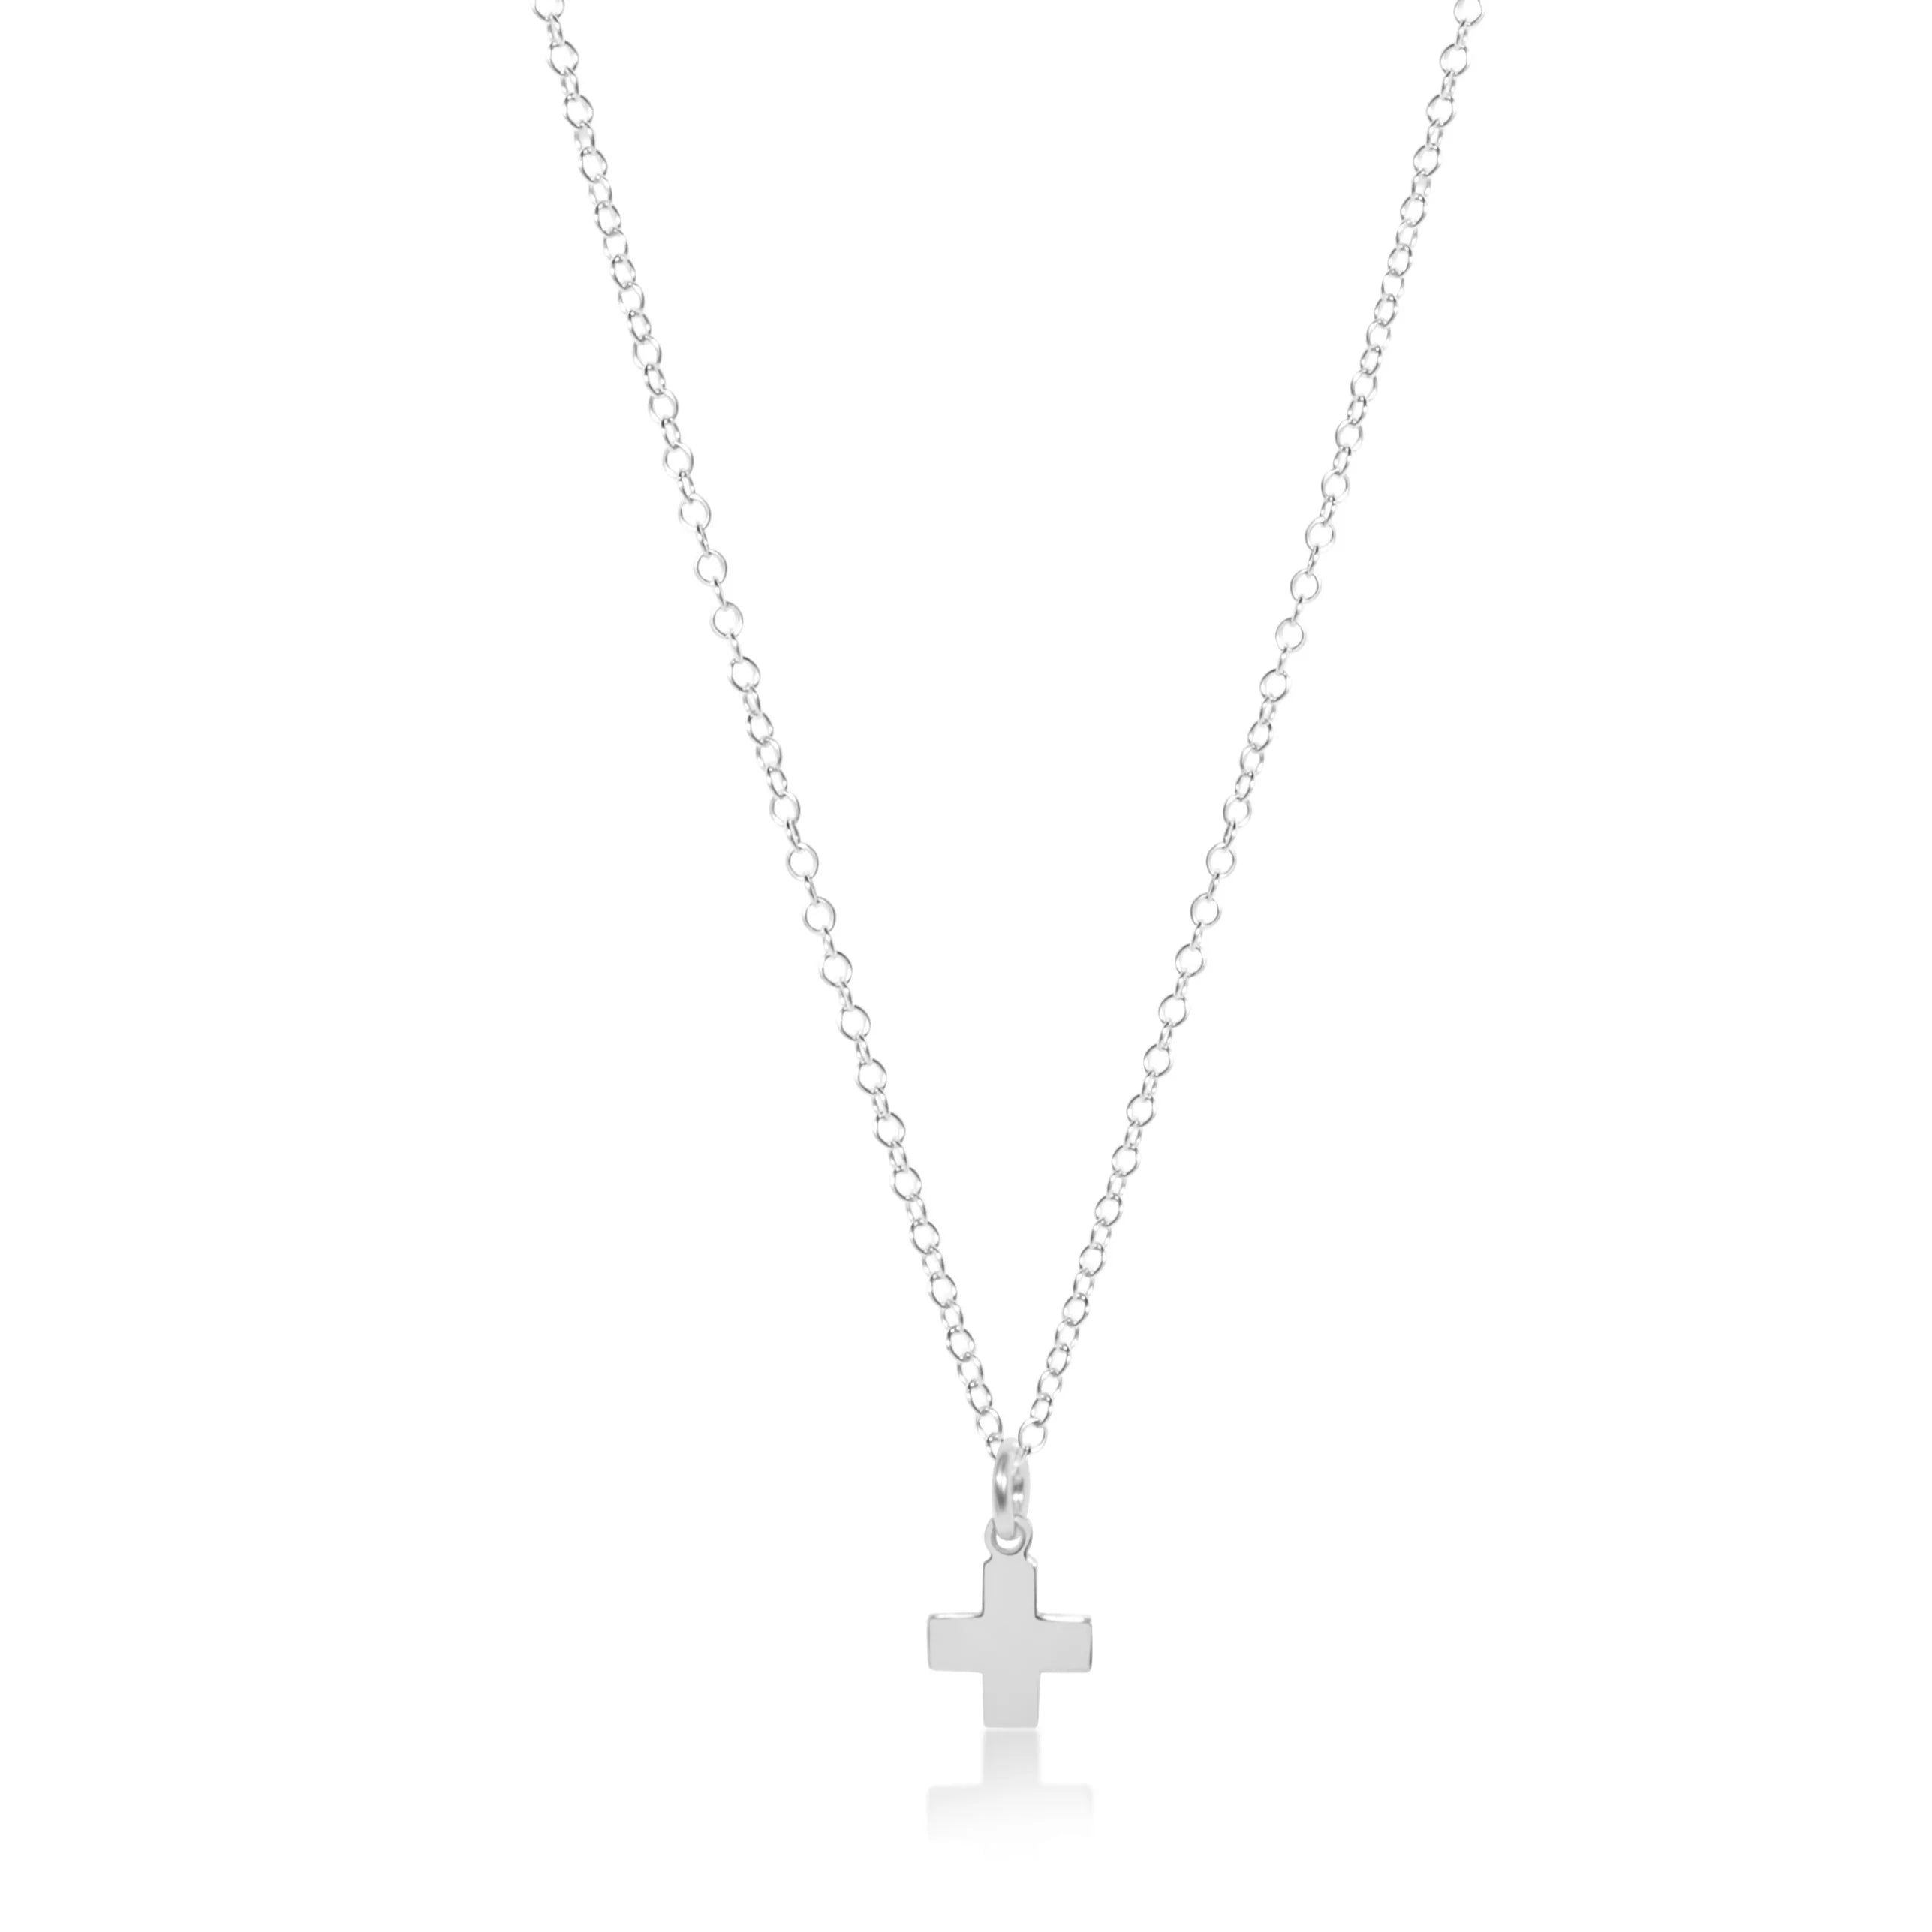 16" Signature Cross Charm Sterling Silver Necklace